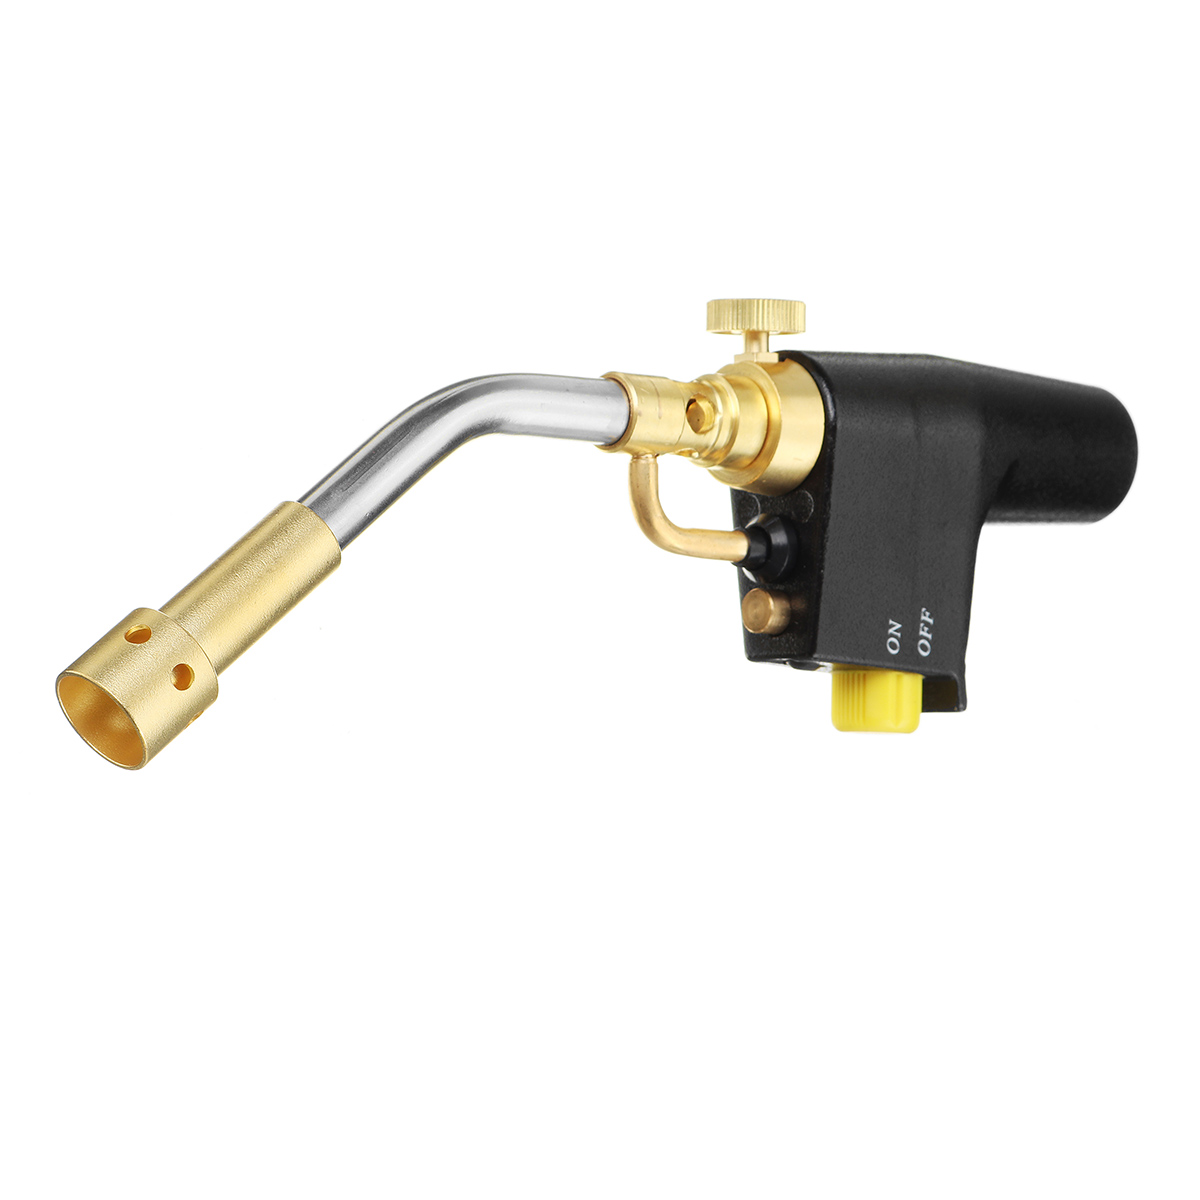 TS8000-Type-High-Temperature-Brass-Mapp-Gas-Torch-Propane-Welding-Pipe-With-a-Replaceable-Brass-Weld-1717065-4